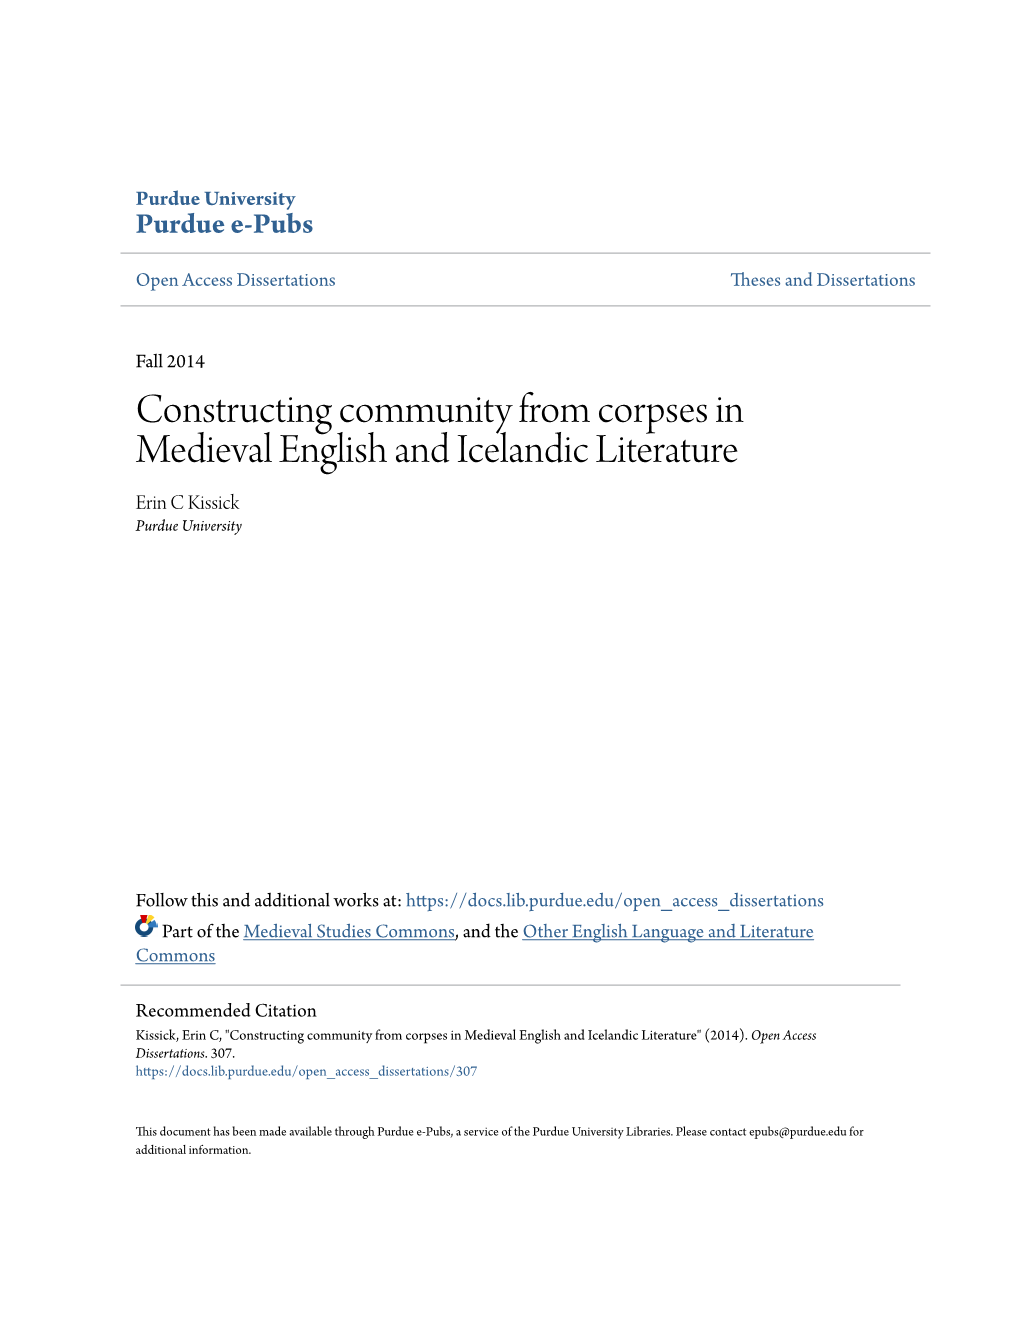 Constructing Community from Corpses in Medieval English and Icelandic Literature Erin C Kissick Purdue University